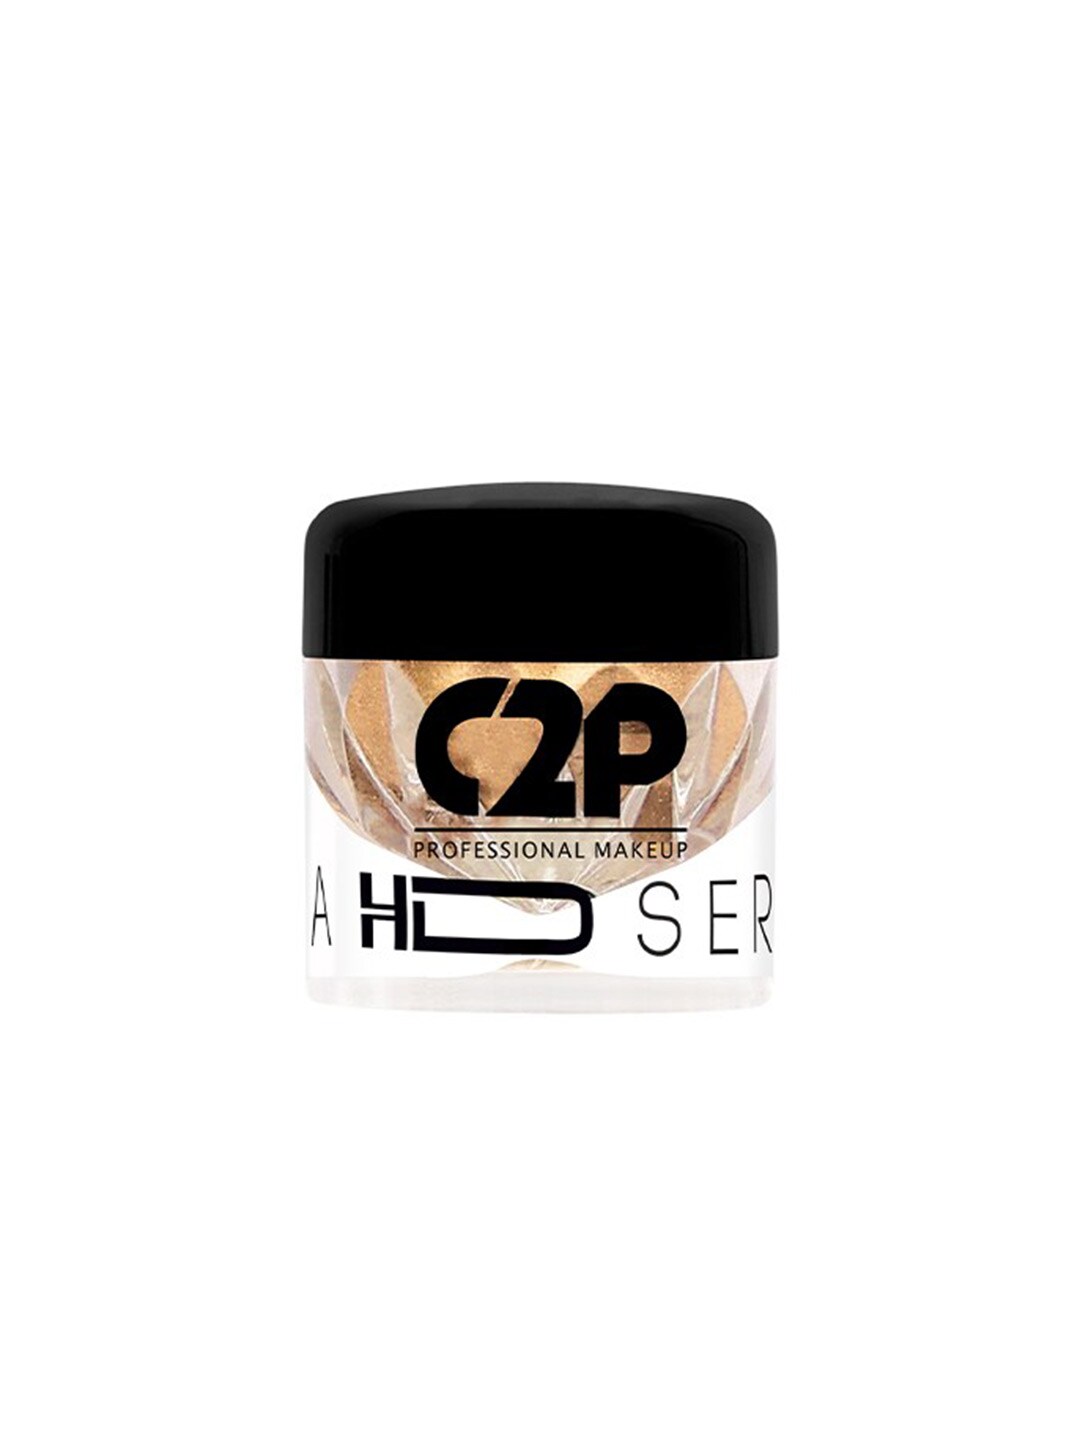 C2P PROFESSIONAL MAKEUP HD Loose Precious Pigments Eyeshadow - Sunkiss Gold 151 Price in India